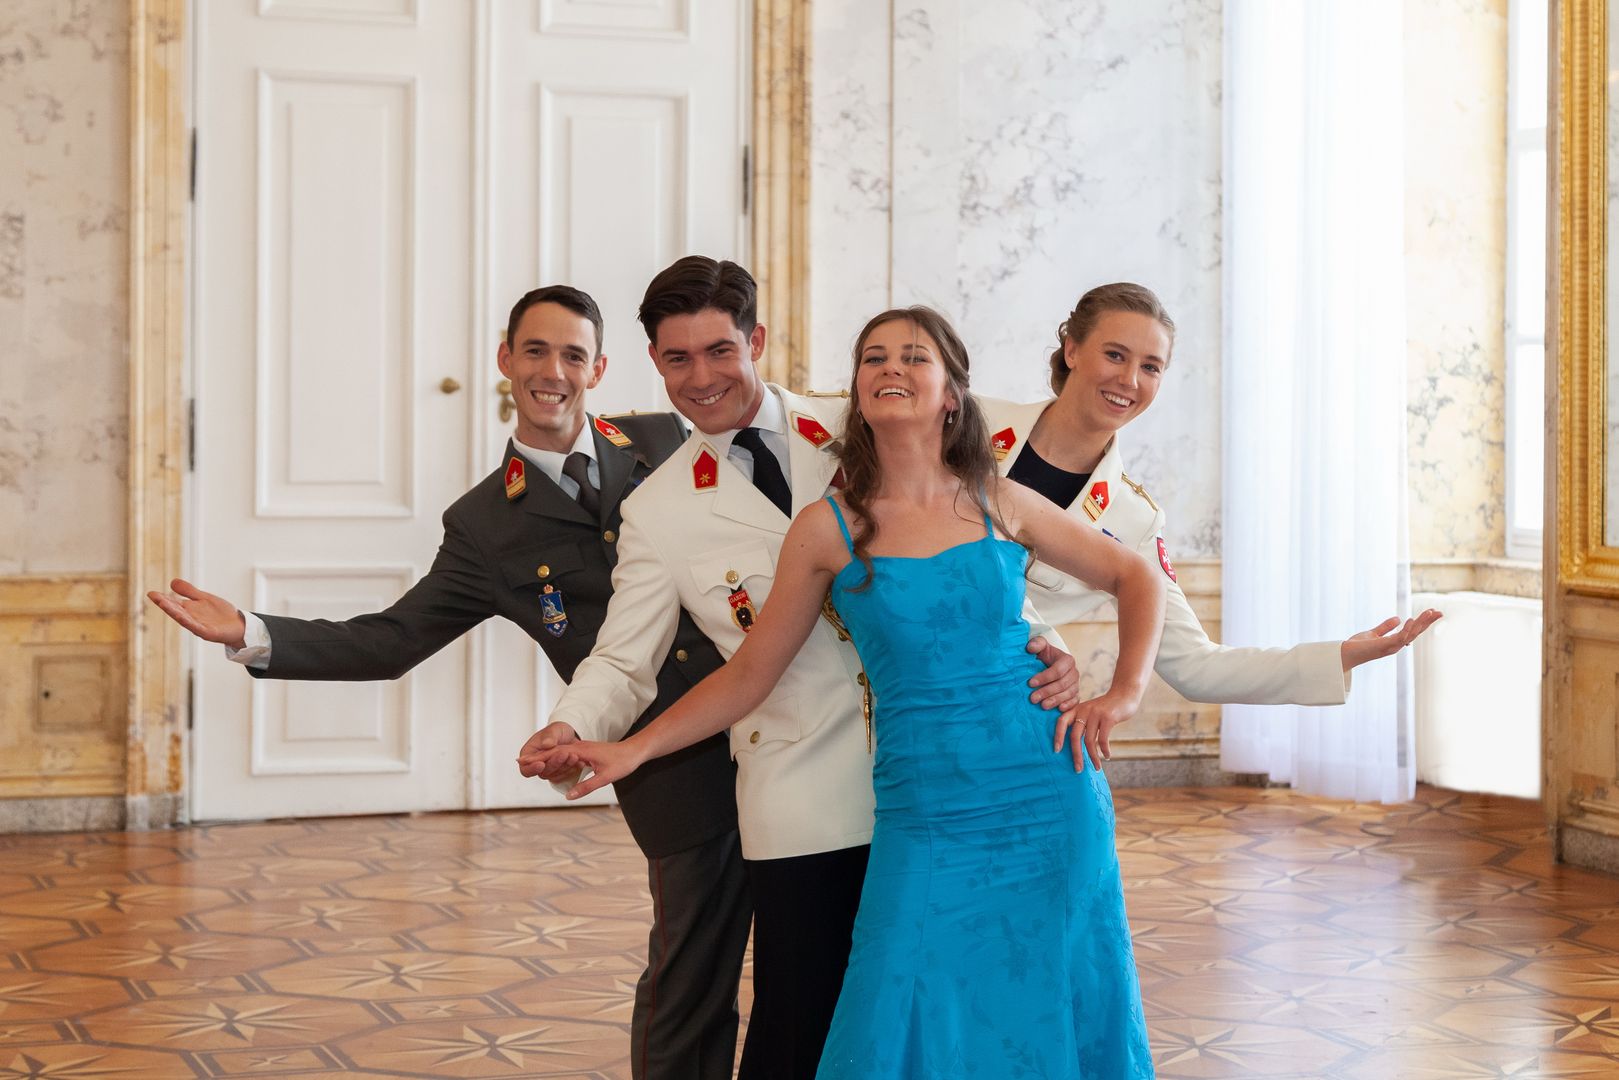 Come and waltz in! – Our motto for the Officers’ Ball 2023